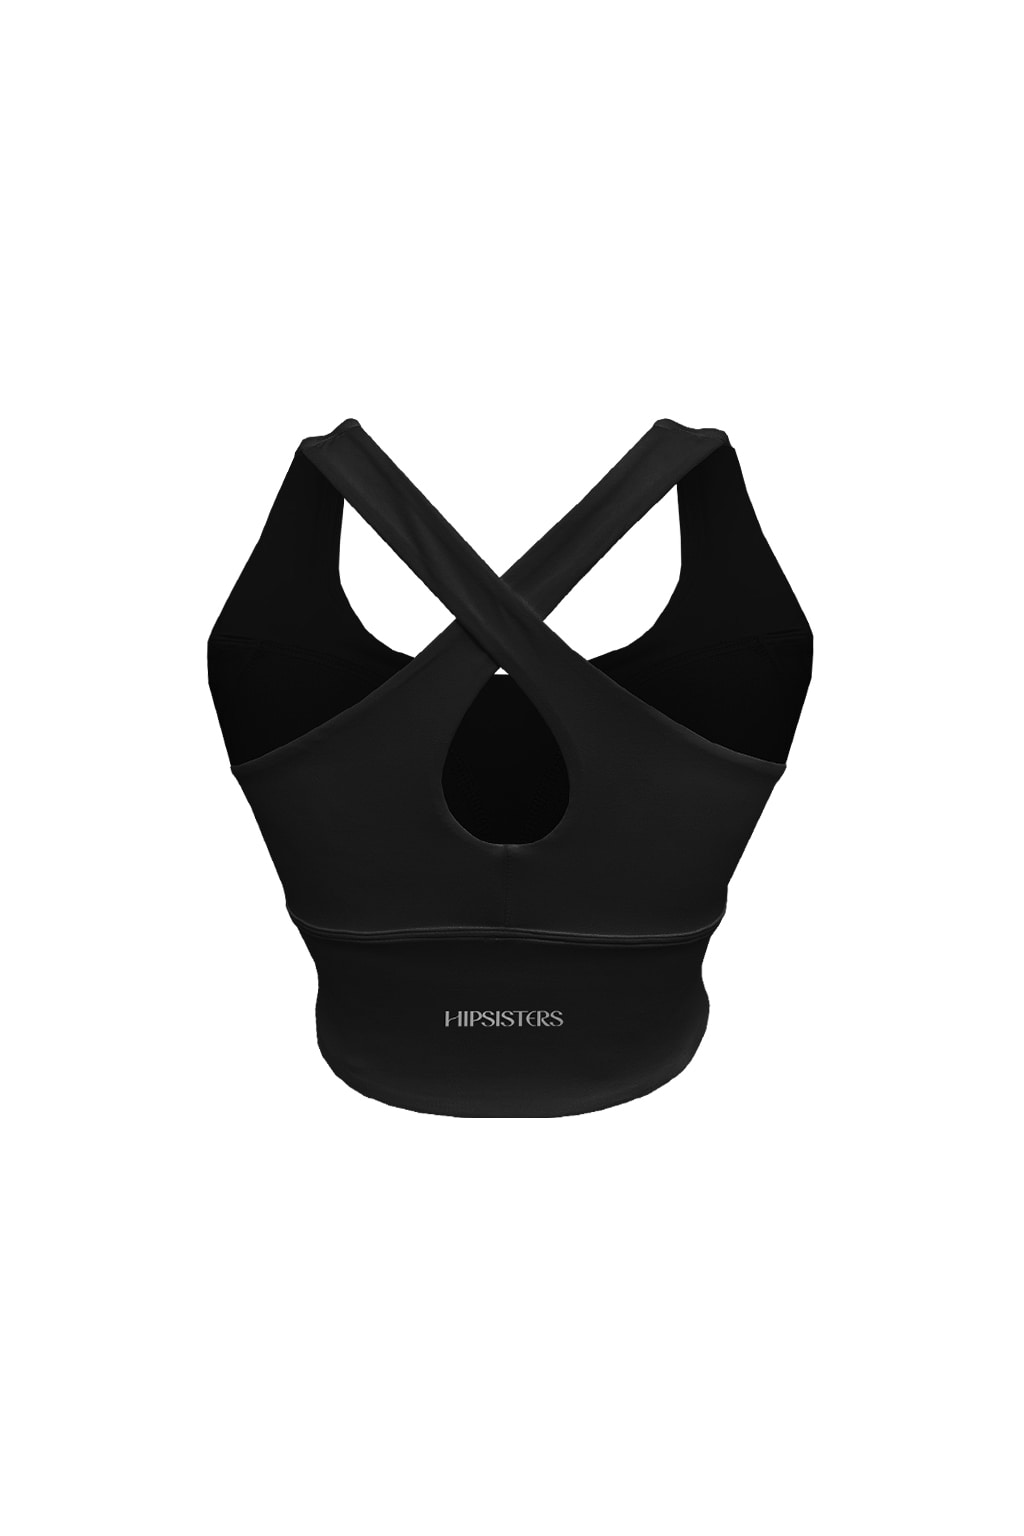 All-in-one support bra top black